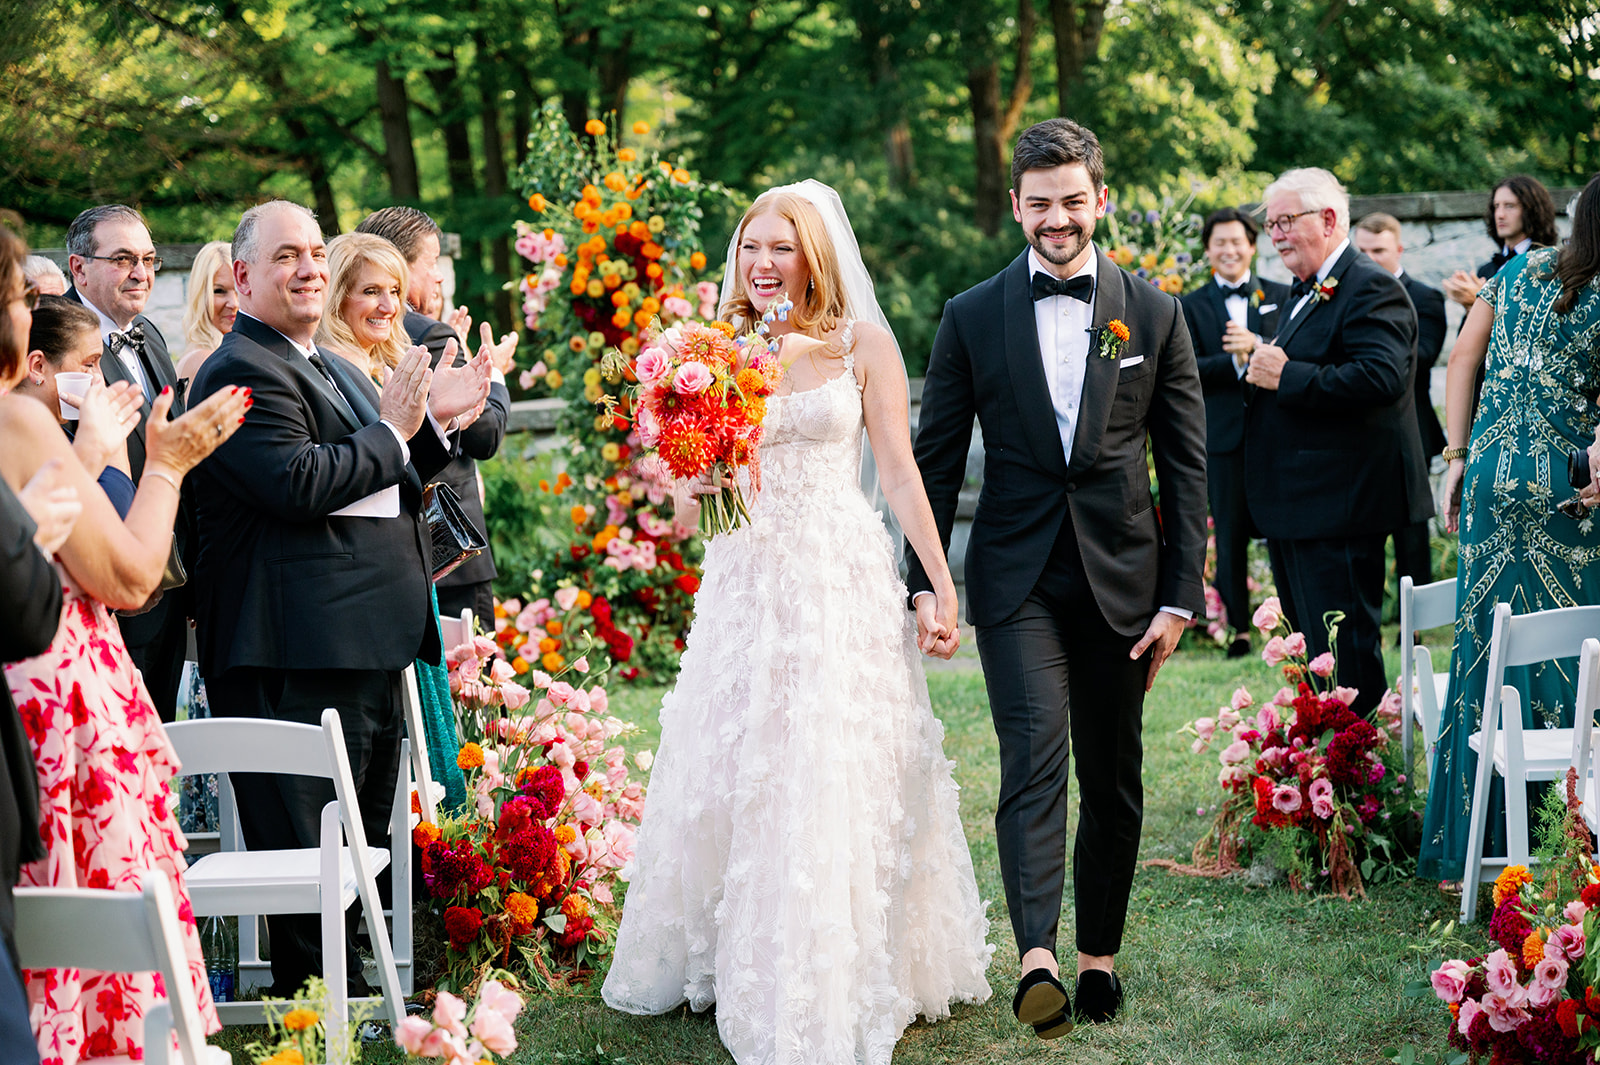 Whimsical floral wedding bride and groom ceremony recessional.